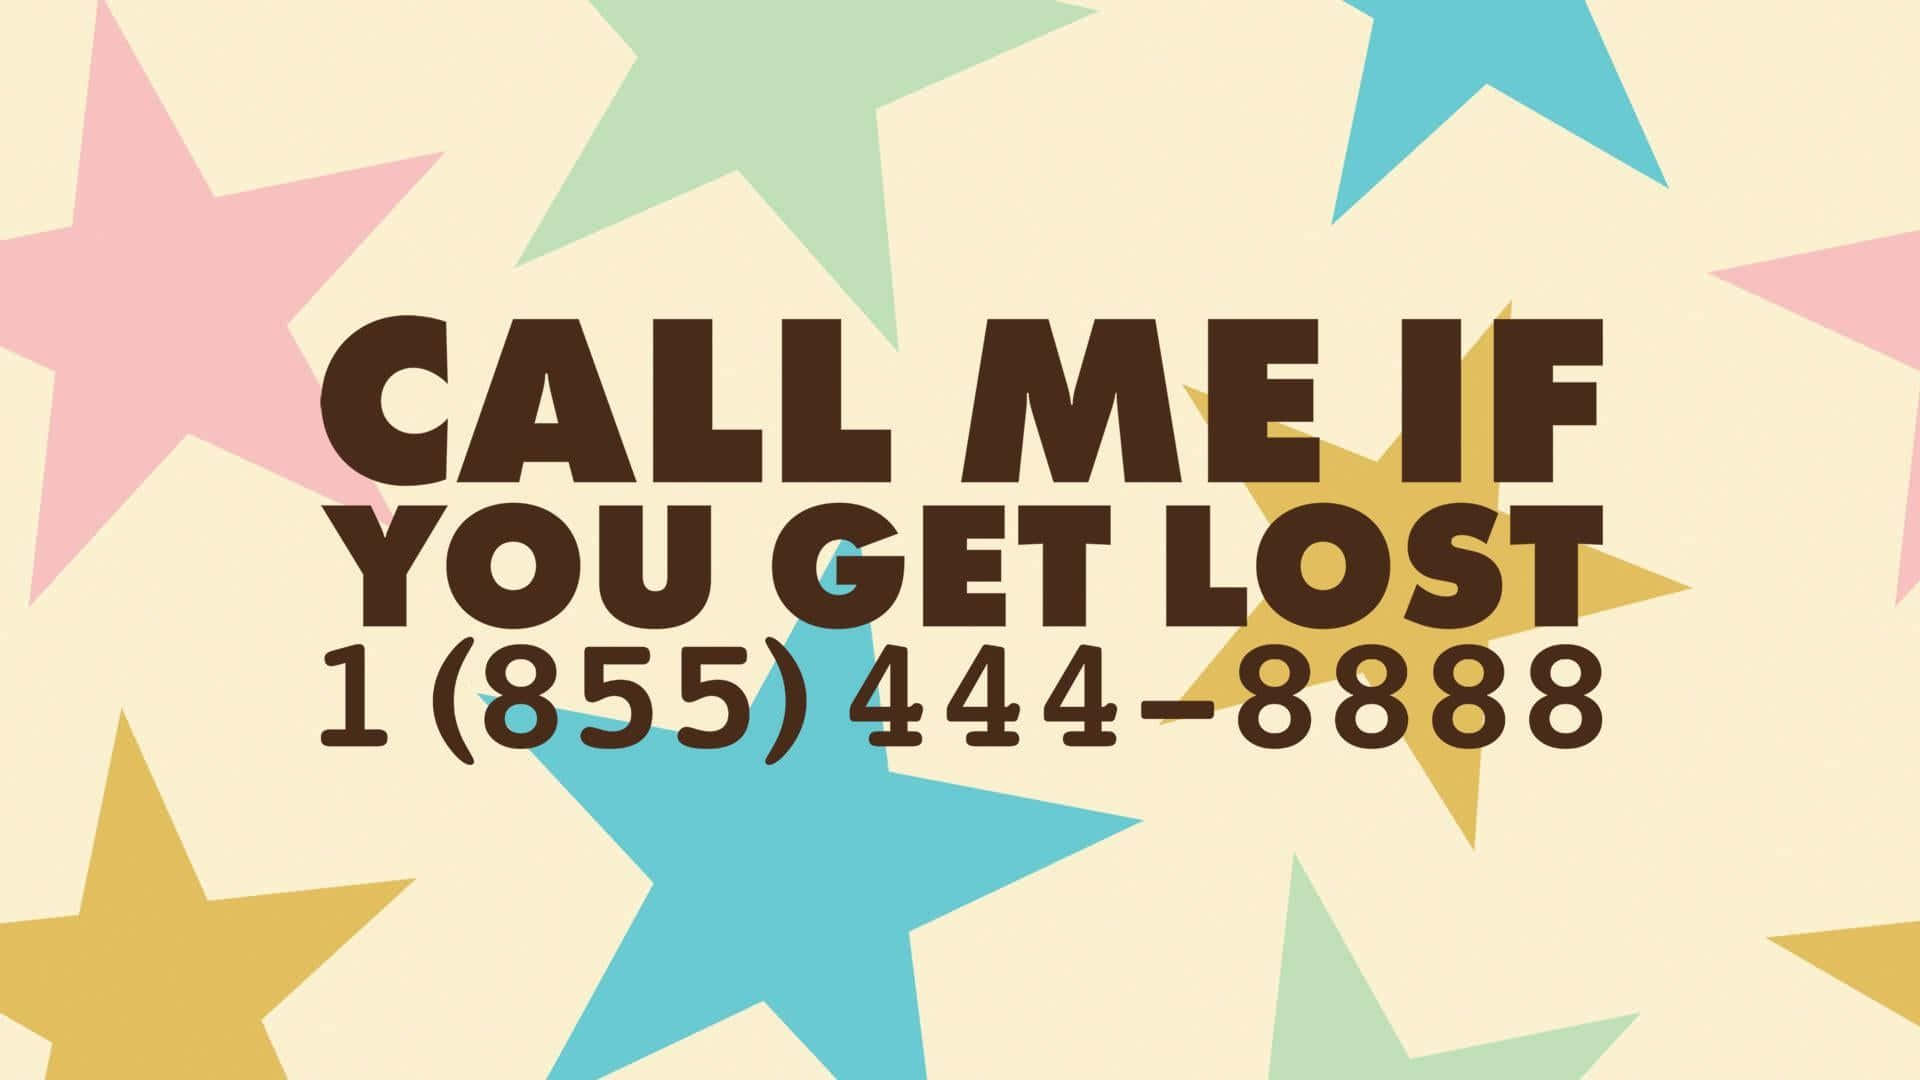 NumbernCall Me If You Get Lost Wallpaper